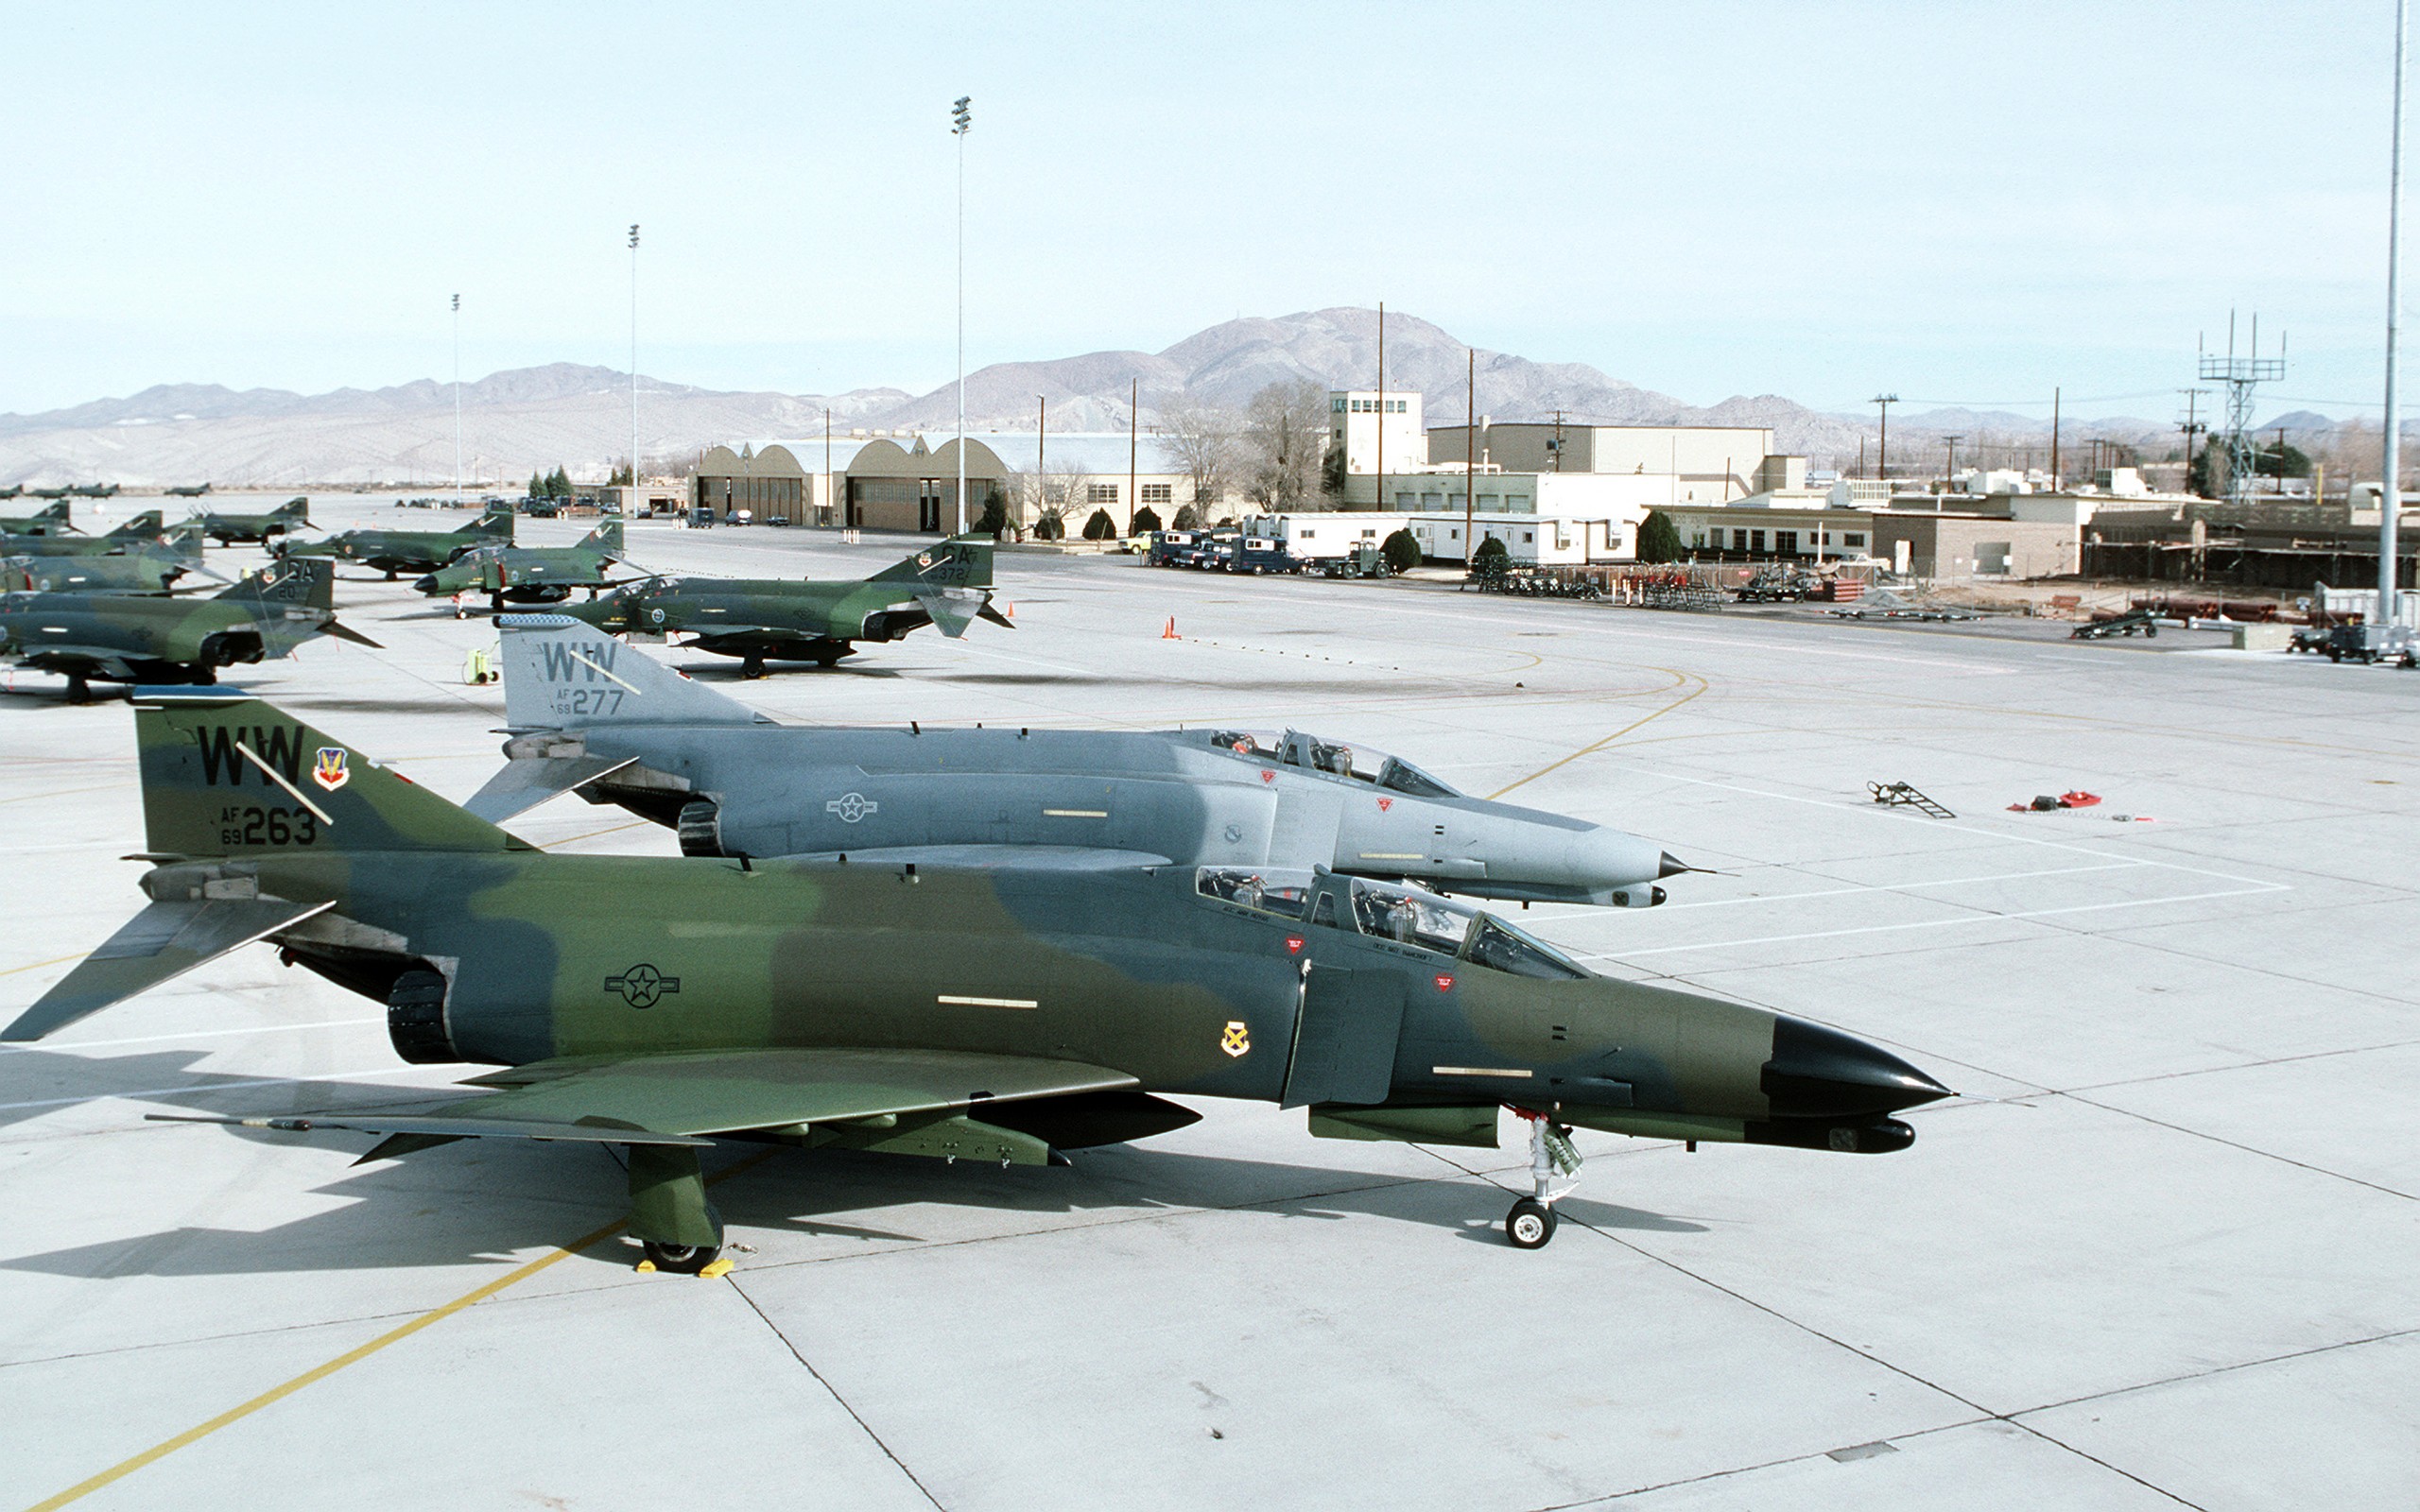 General 2560x1600 McDonnell Douglas F-4 Phantom II aircraft military aircraft military base military military vehicle vehicle US Air Force Wild Weasel 1987 (Year) air force California jet fighter camouflage McDonnell Douglas American aircraft